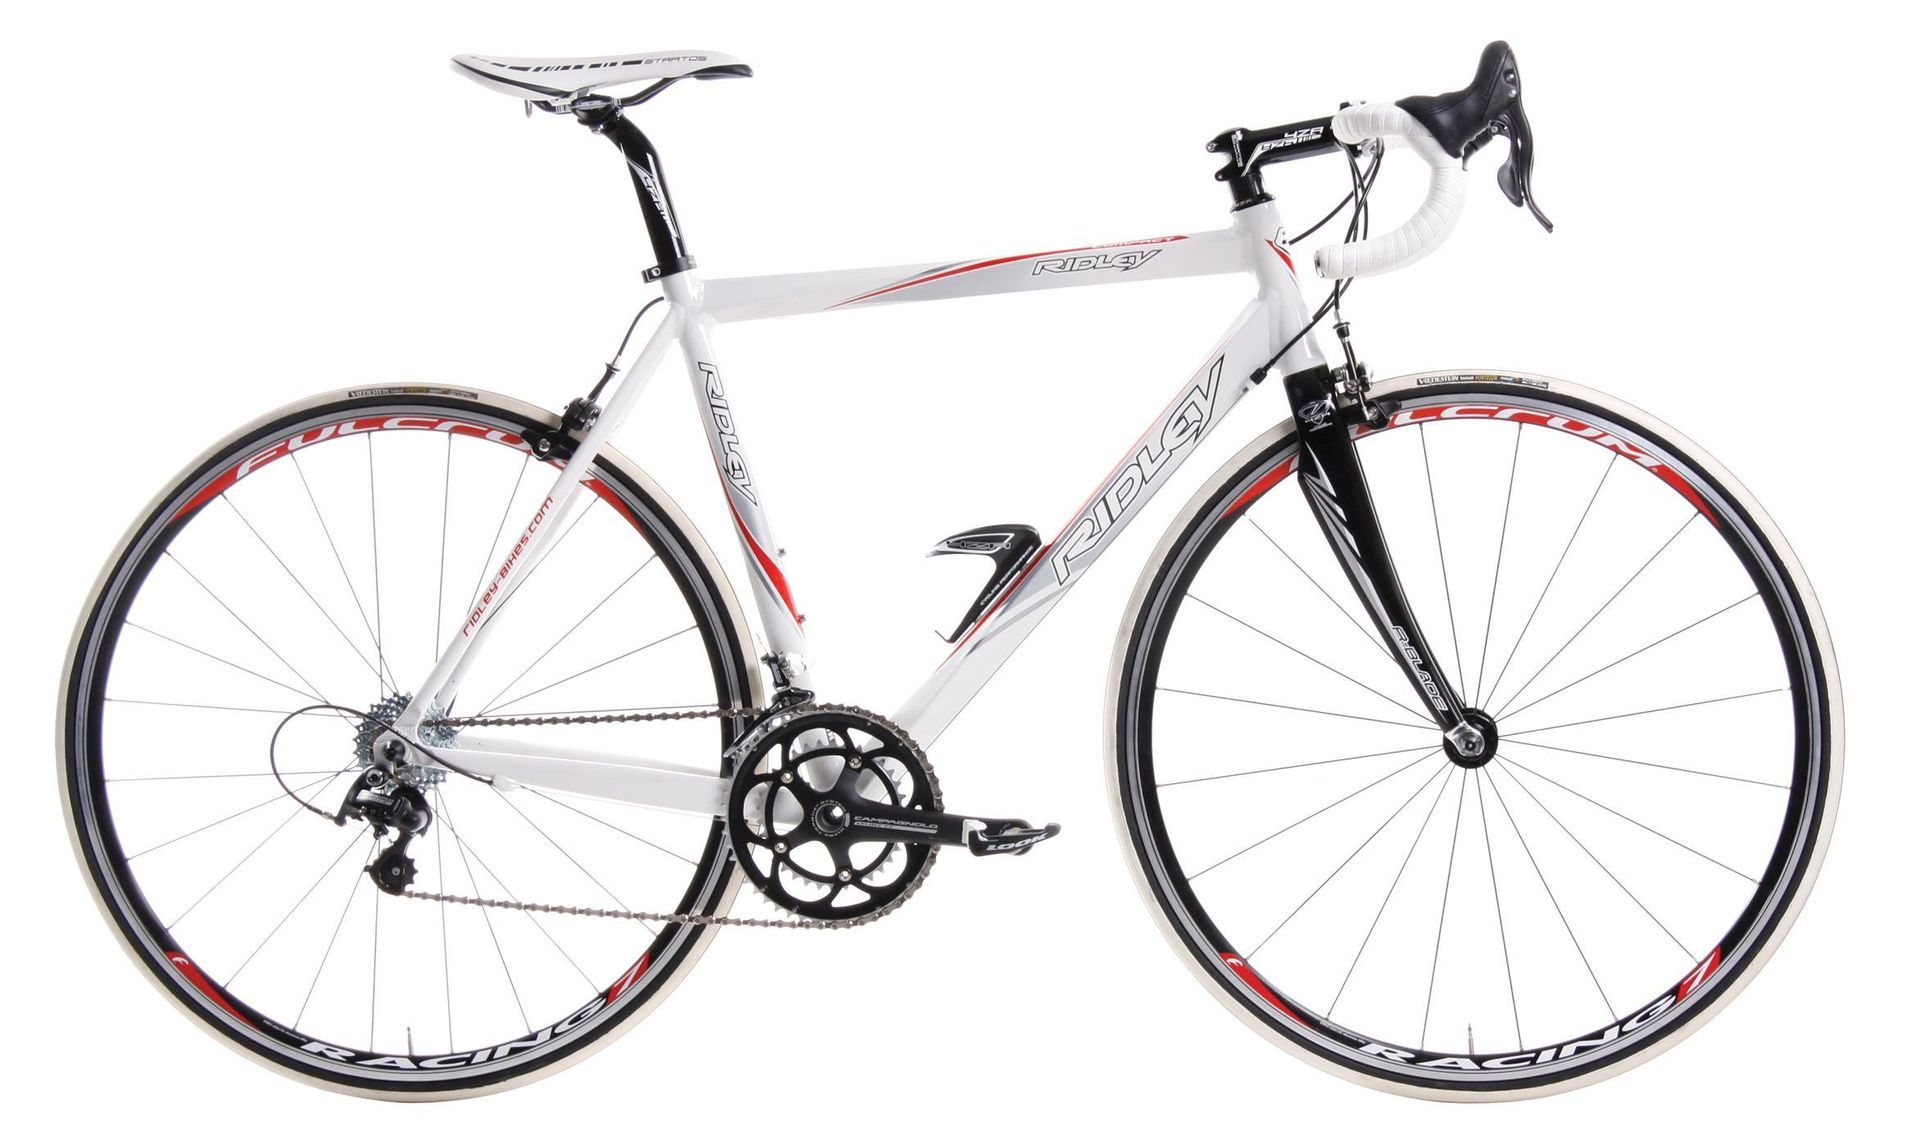 Cullen's 2010 Ridley Compact Photo